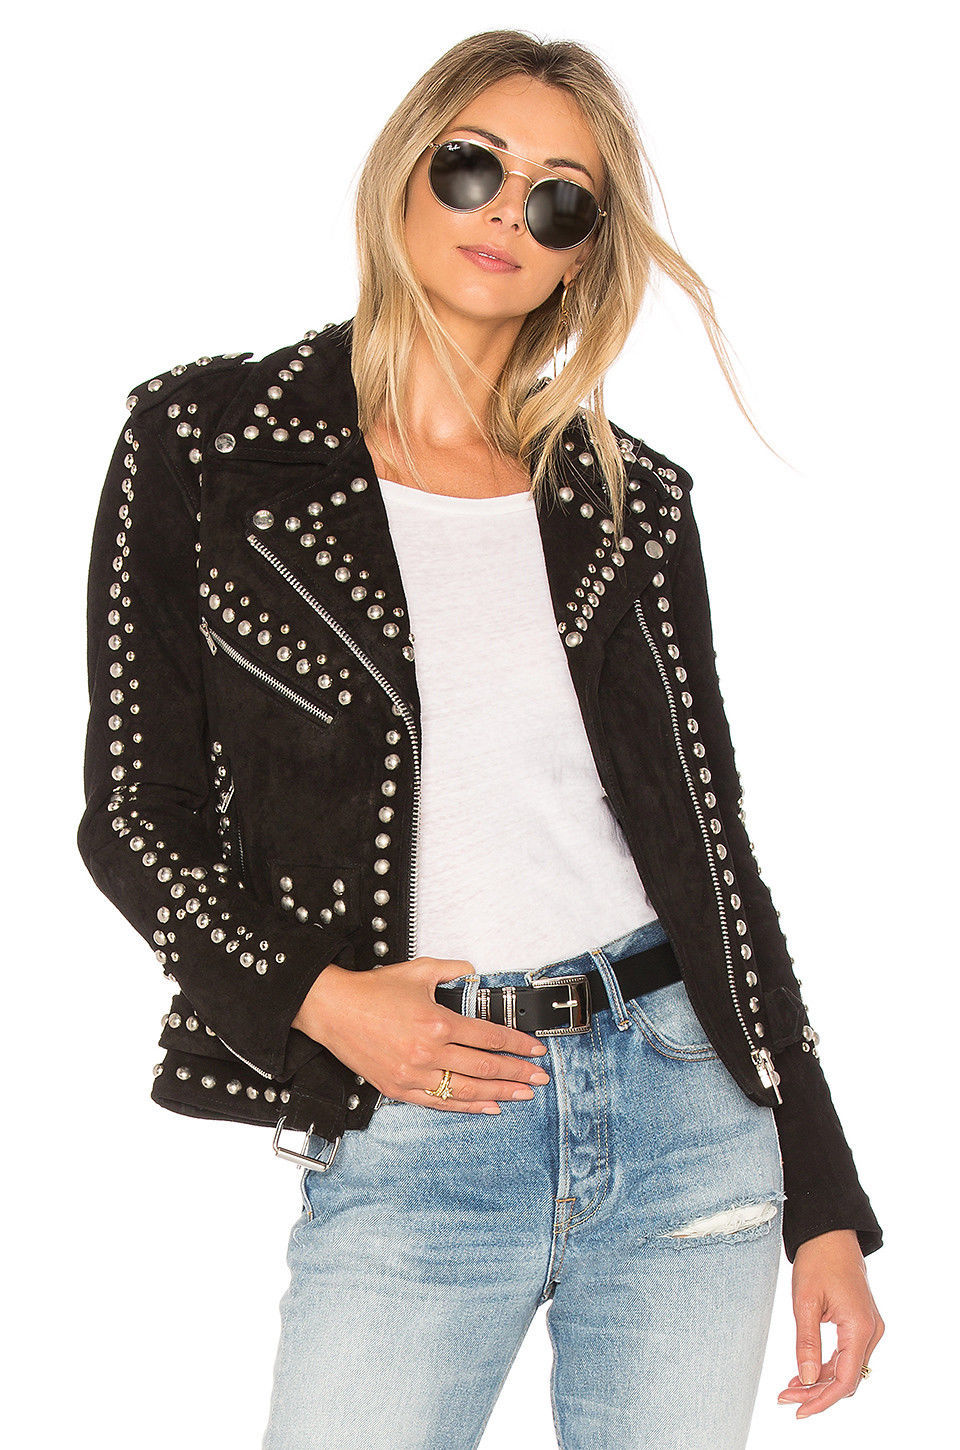 NEW WOMAN WESTERN STYLE BROWN SUEDE STUDDED LEATHER JACKET XS TO 6XL ...